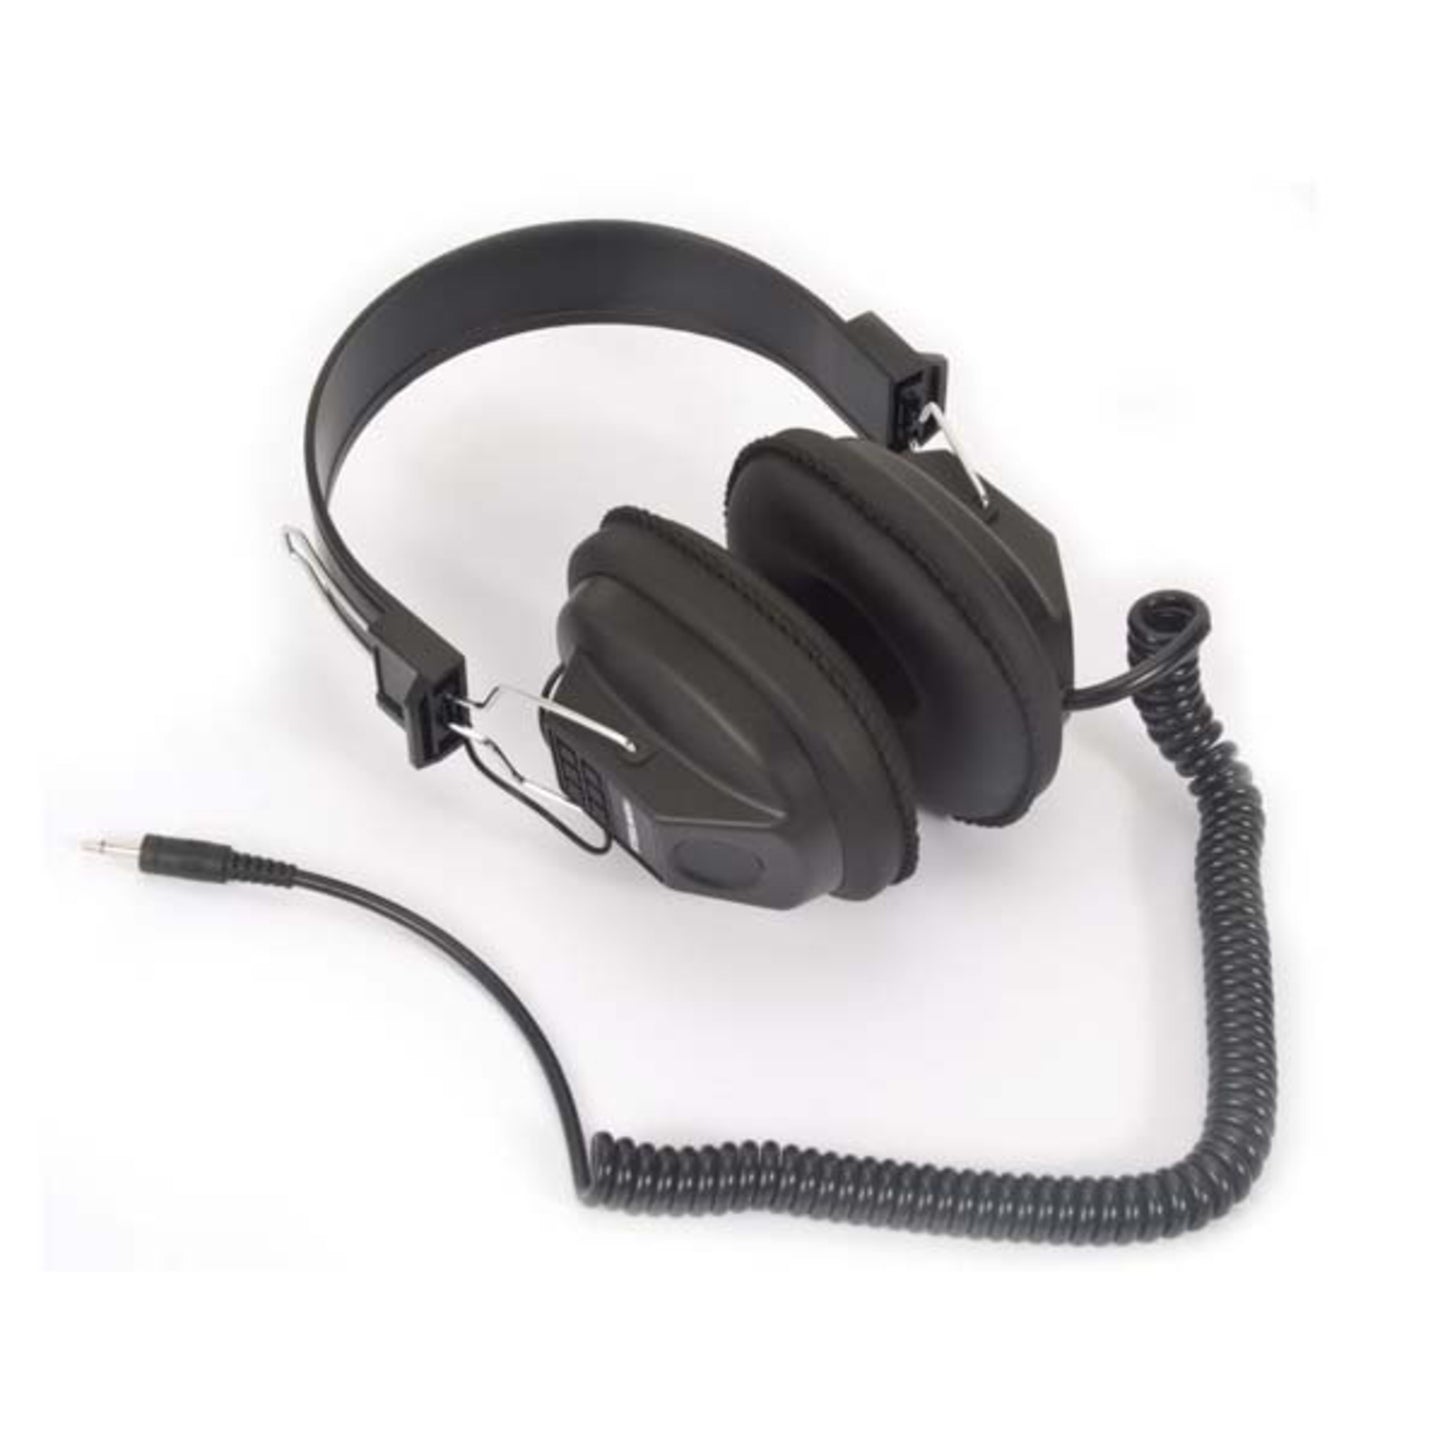 A high quality set of STEELMAN headphones to replace lost or damaged headphones used by the ChassisEAR and EngineEAR I and II electronic dianostic devises.